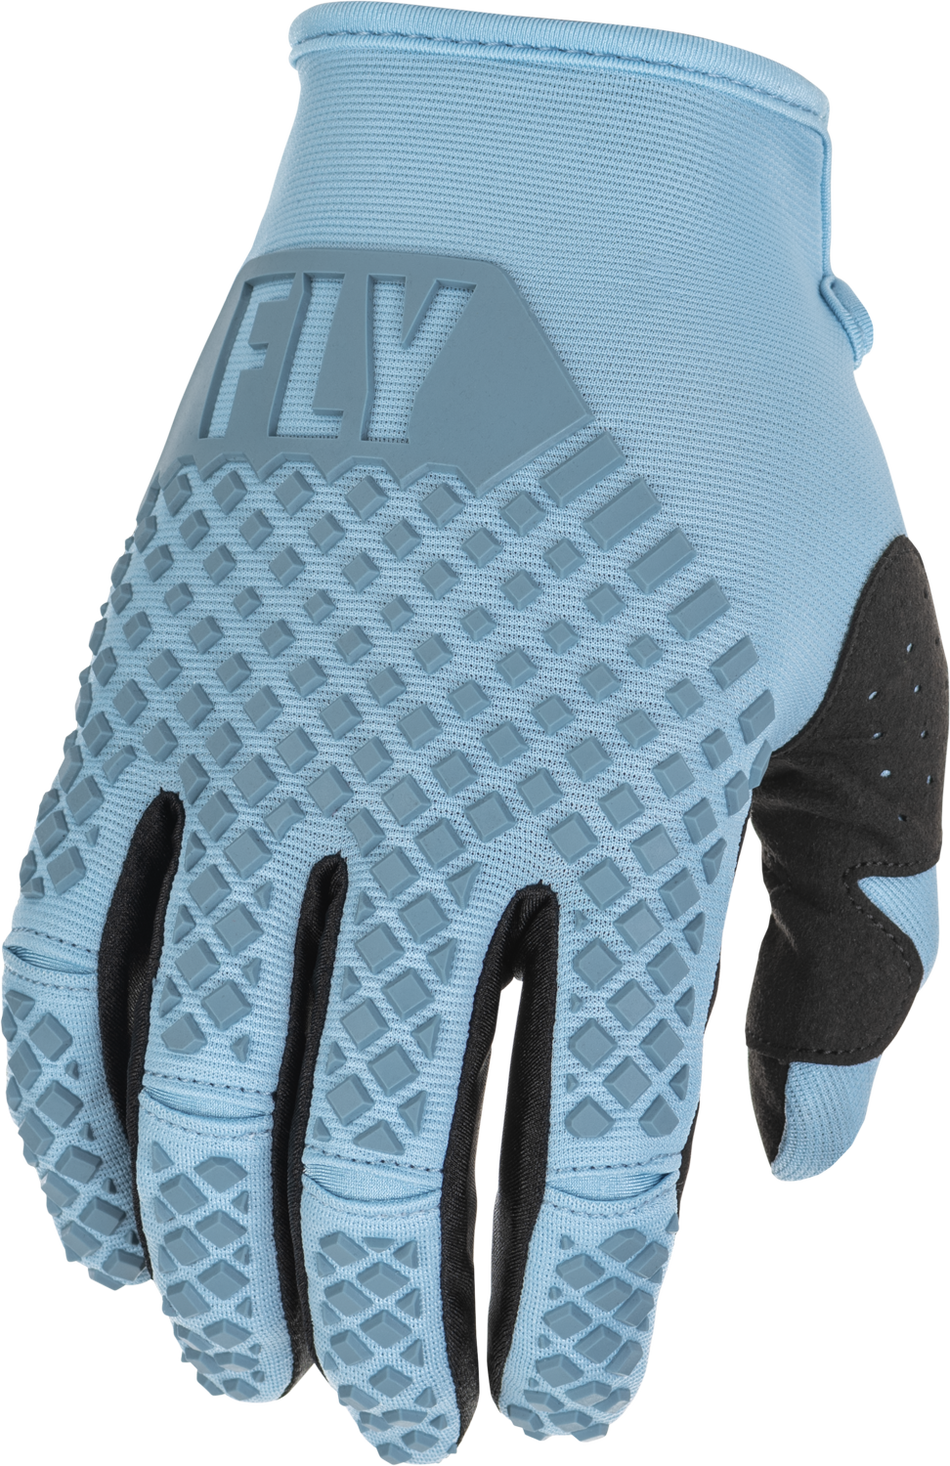 FLY RACING Kinetic Gloves Light Blue Md 375-414M